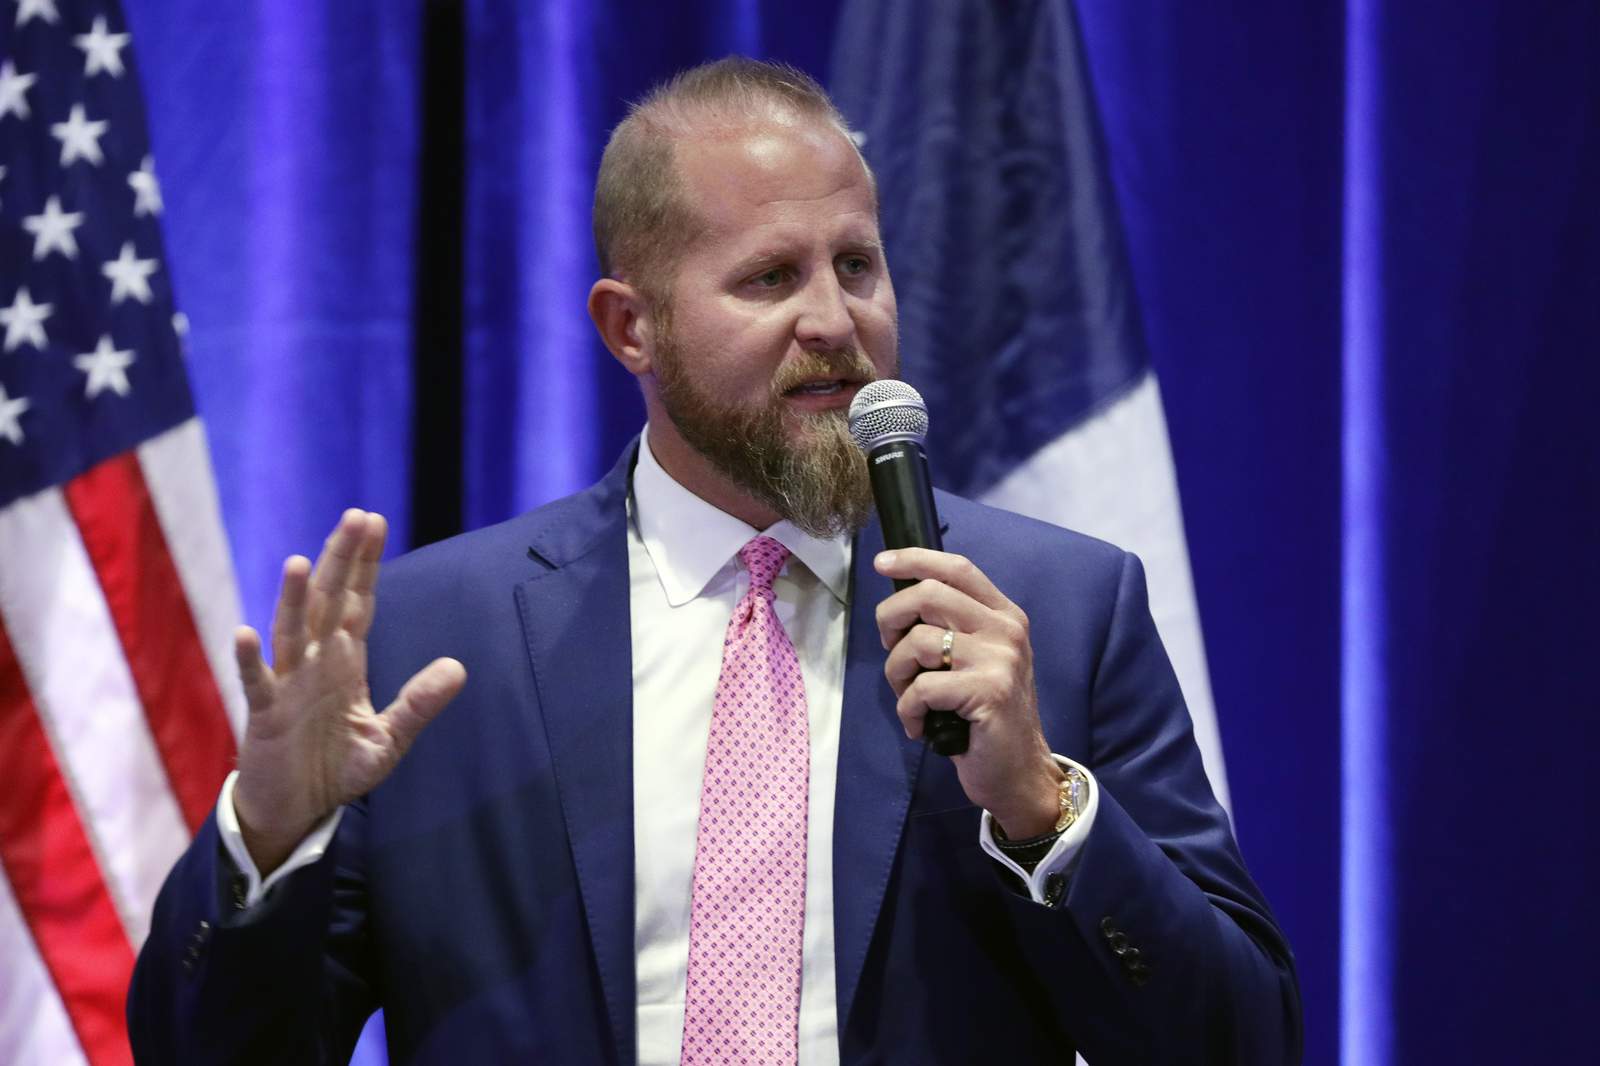 Parscale steps back from Trump team after hospitalization